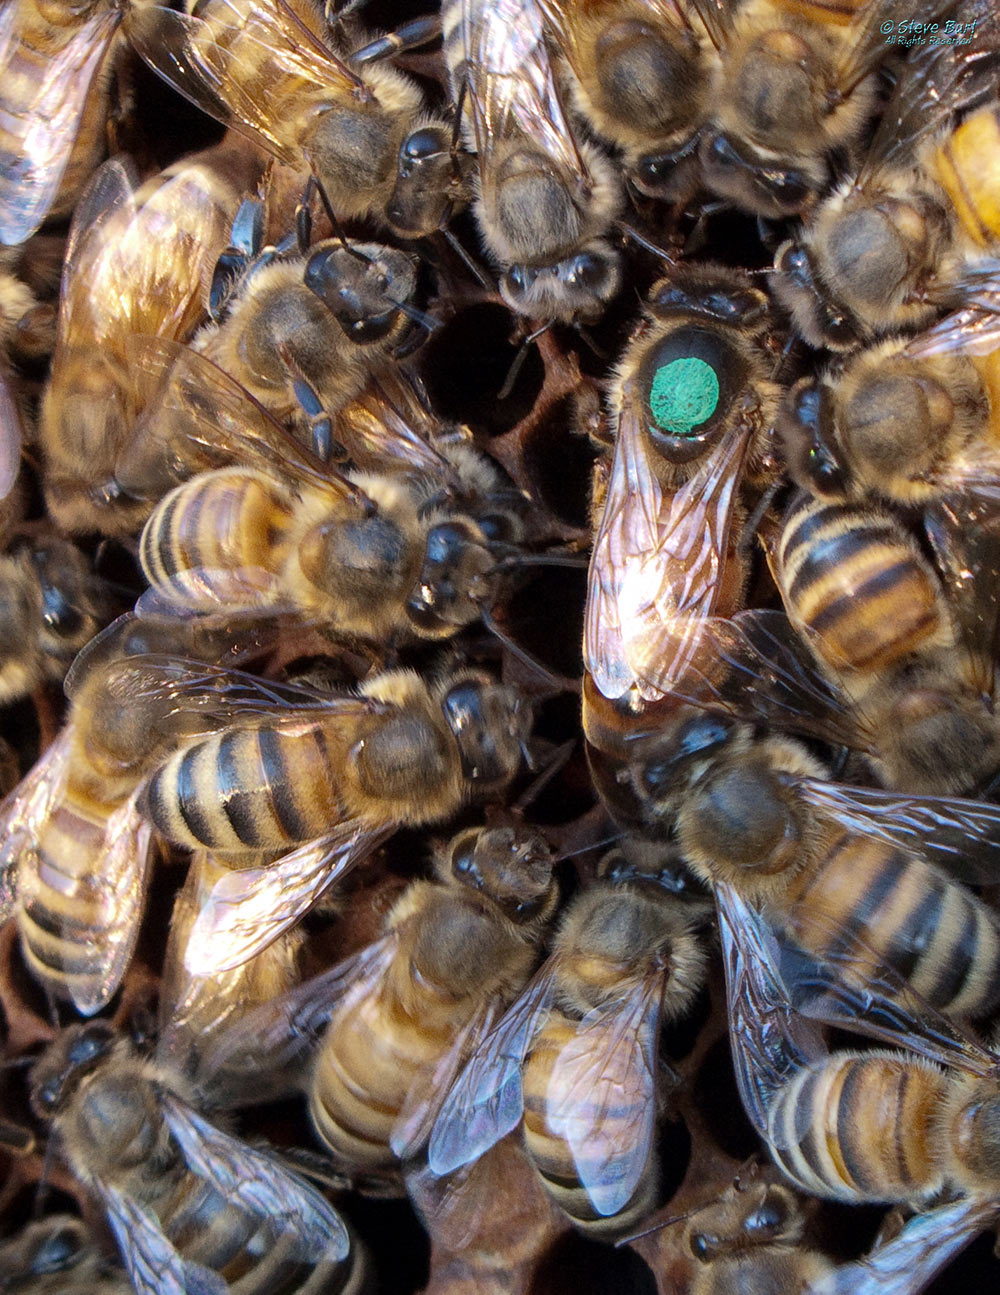 A bee hive with worker bees surrounding the queen